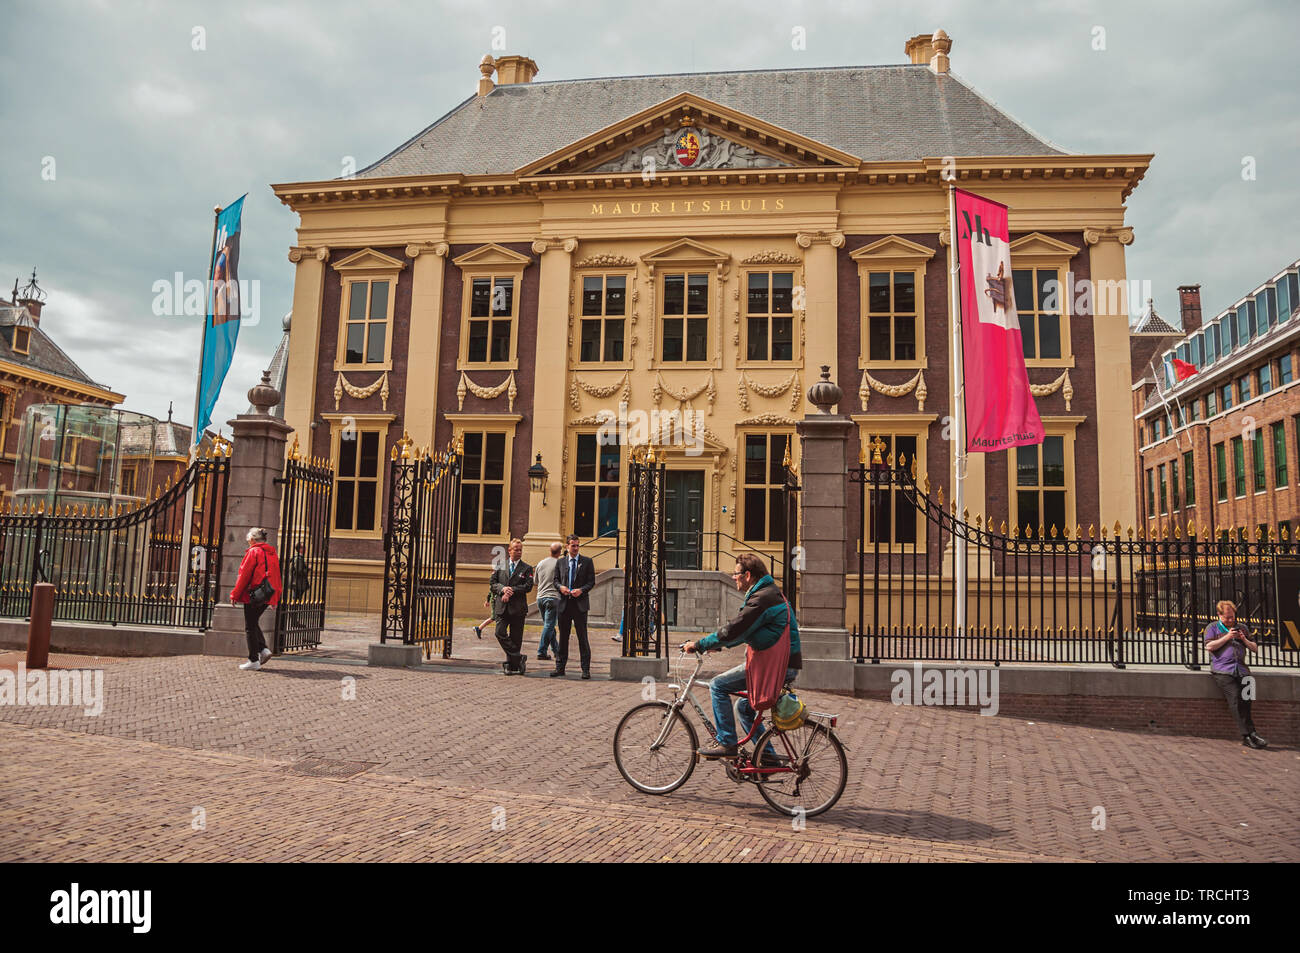 People and Mauritshuis House, museum with Dutch Golden Age paintings at The Hague. Is a mix of historic city with modernity in Netherlands. Stock Photo